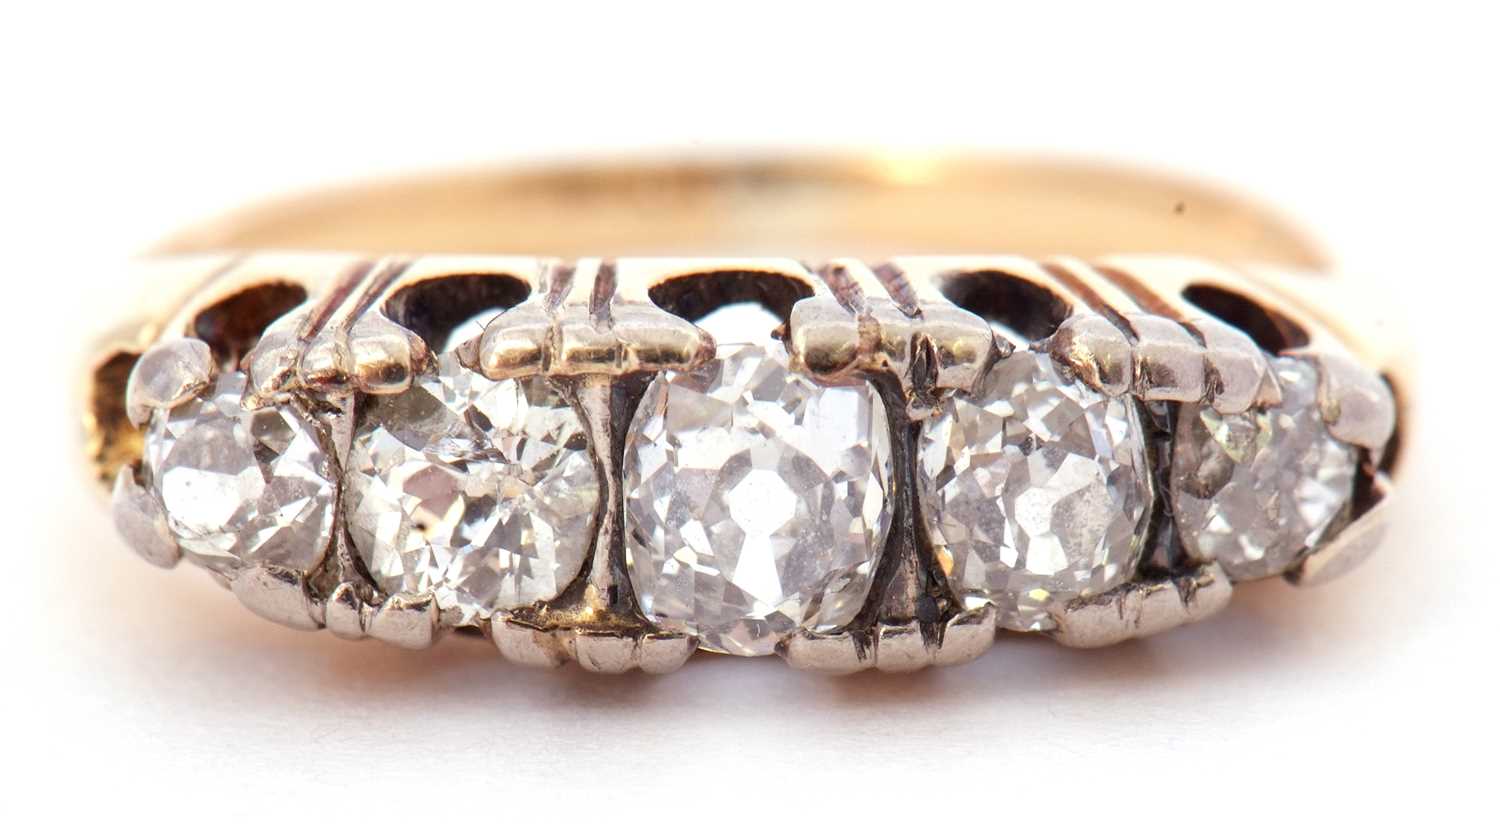 Antique 5 stone diamond ring featuring five old cut diamonds individually claw set in a pierced